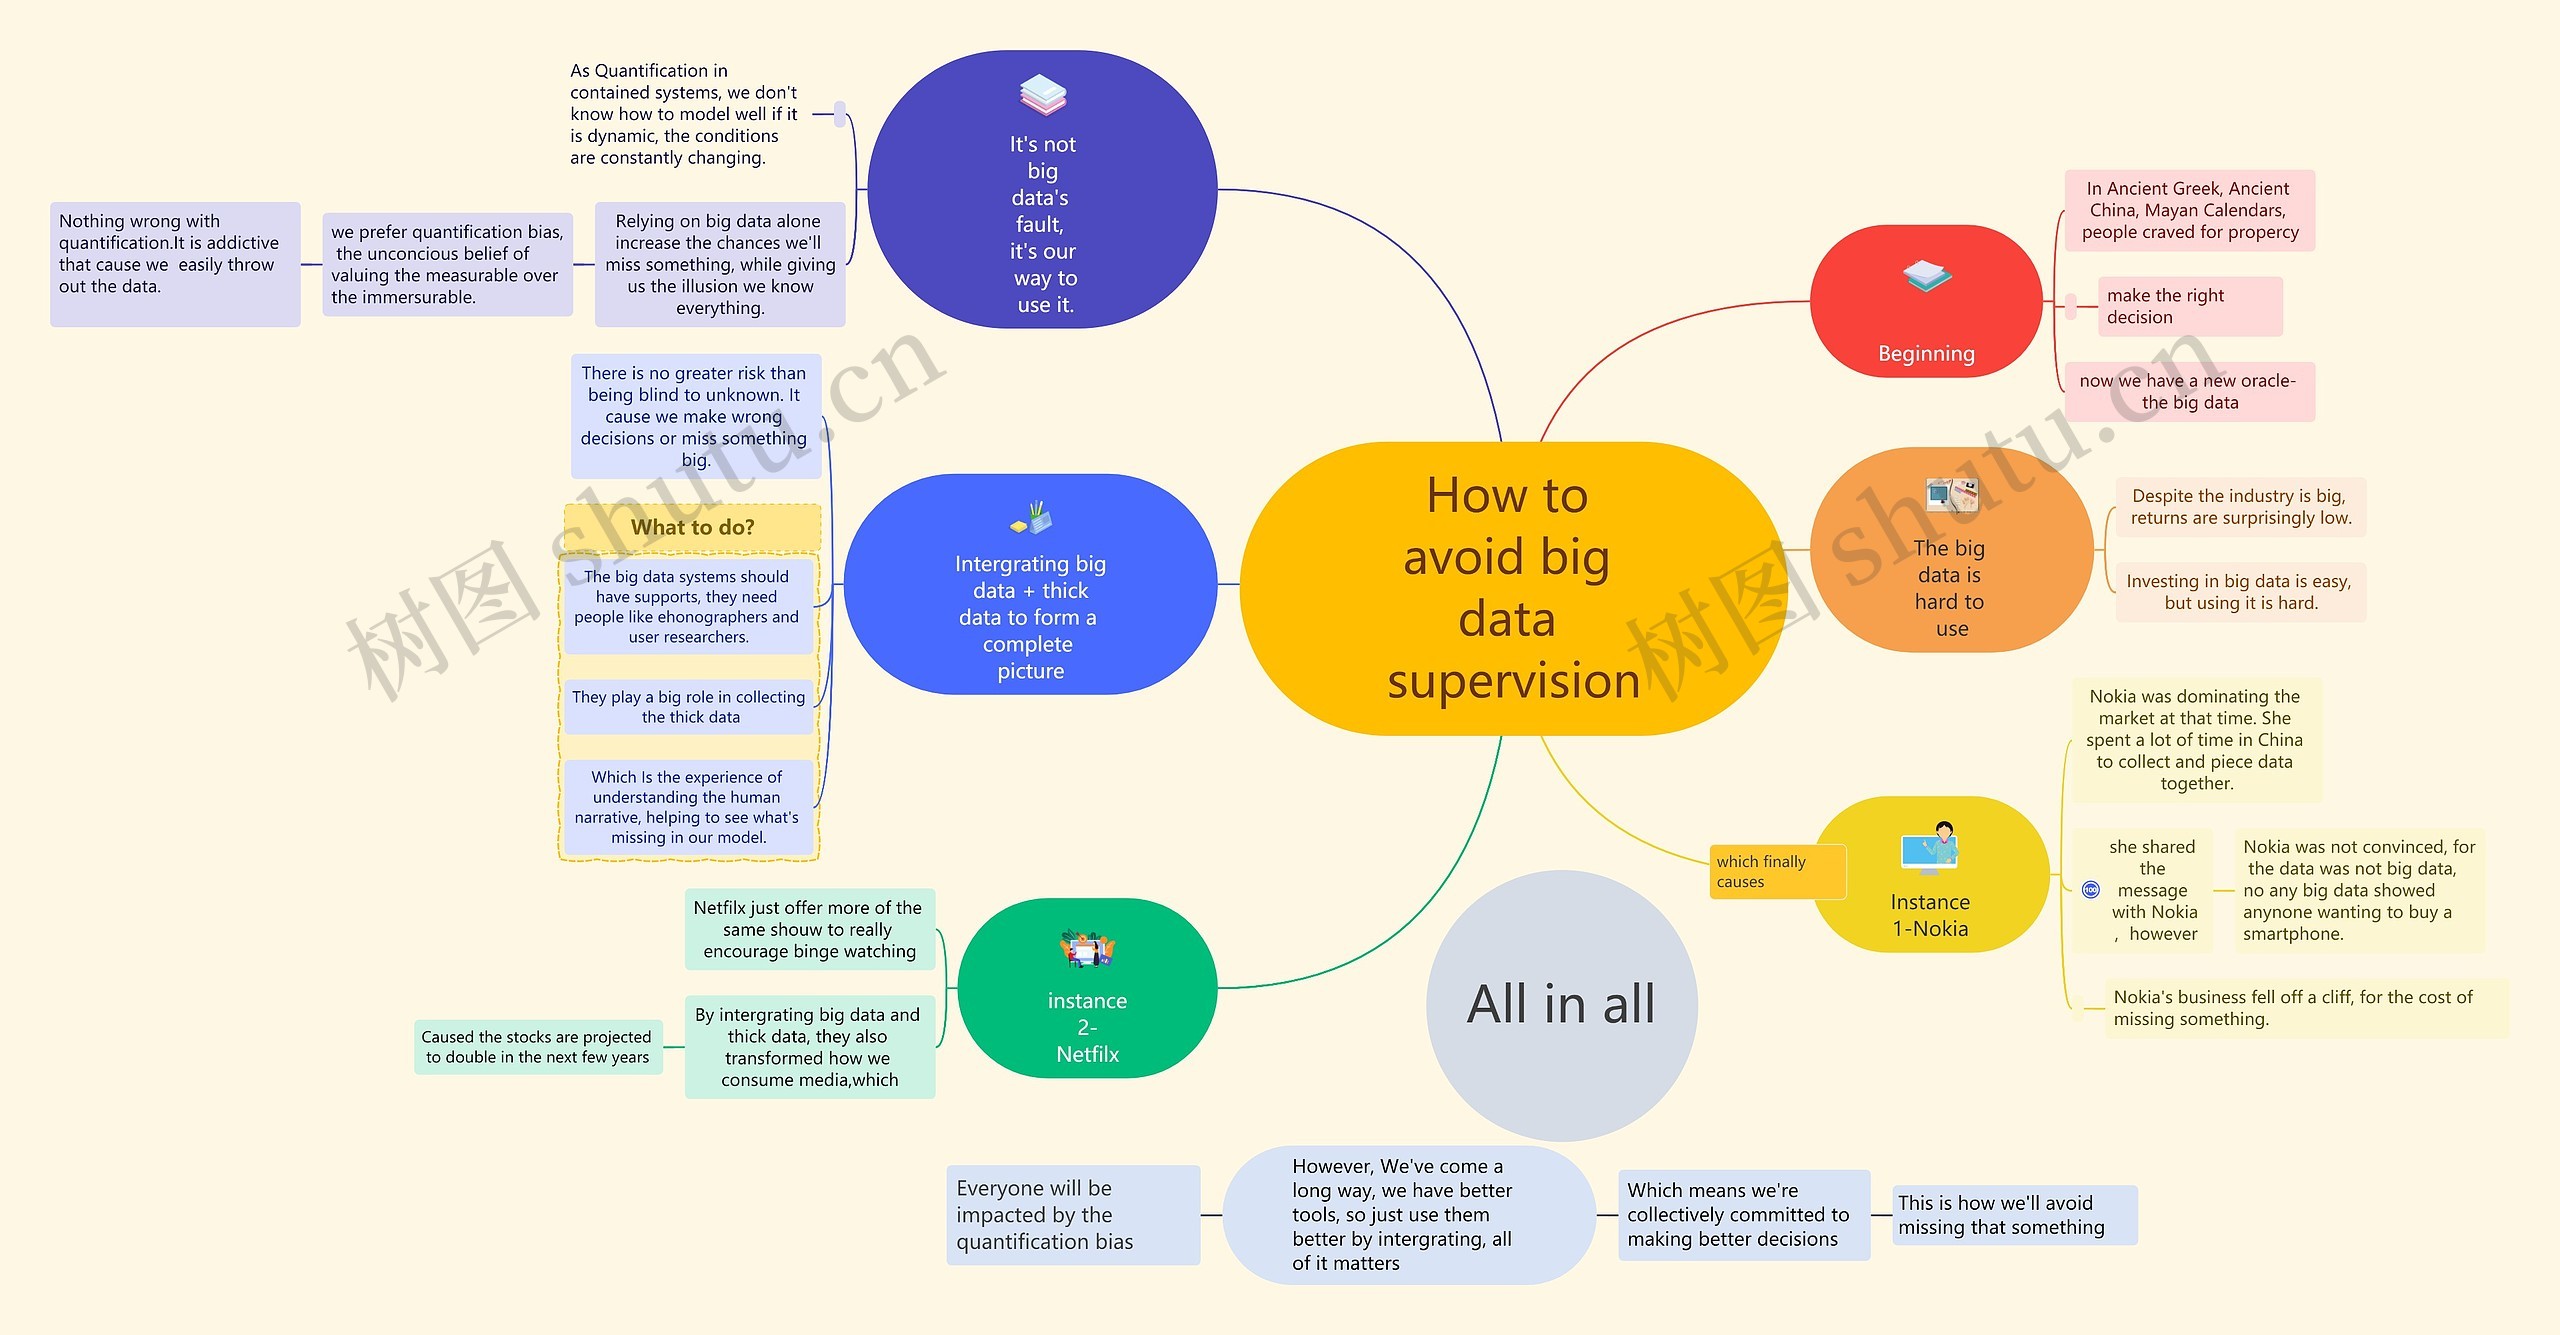 How to avoid big data supervision